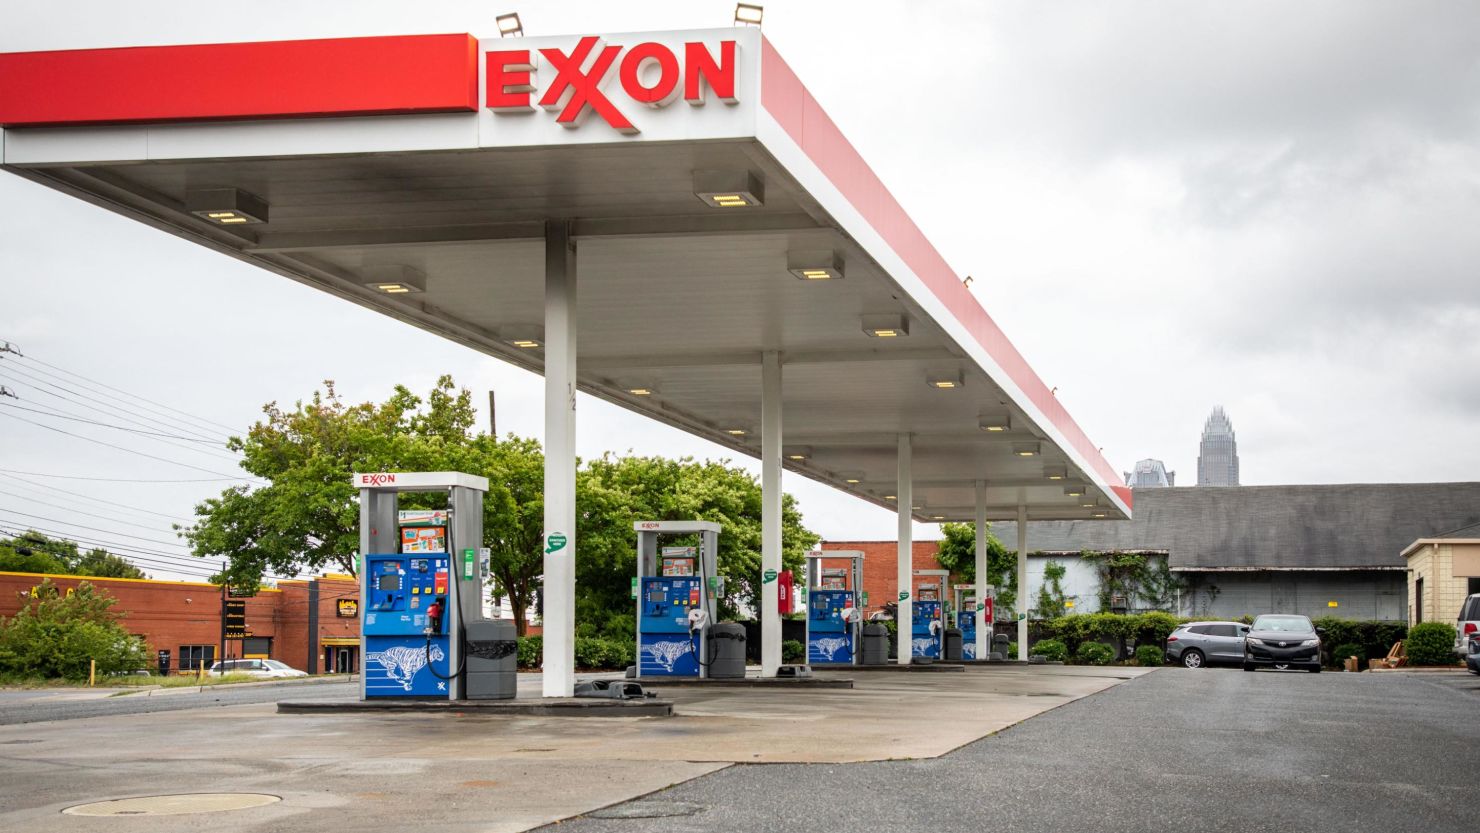 ExxonMobil earnings fell short of forecasts on lower oil and natural gas prices.